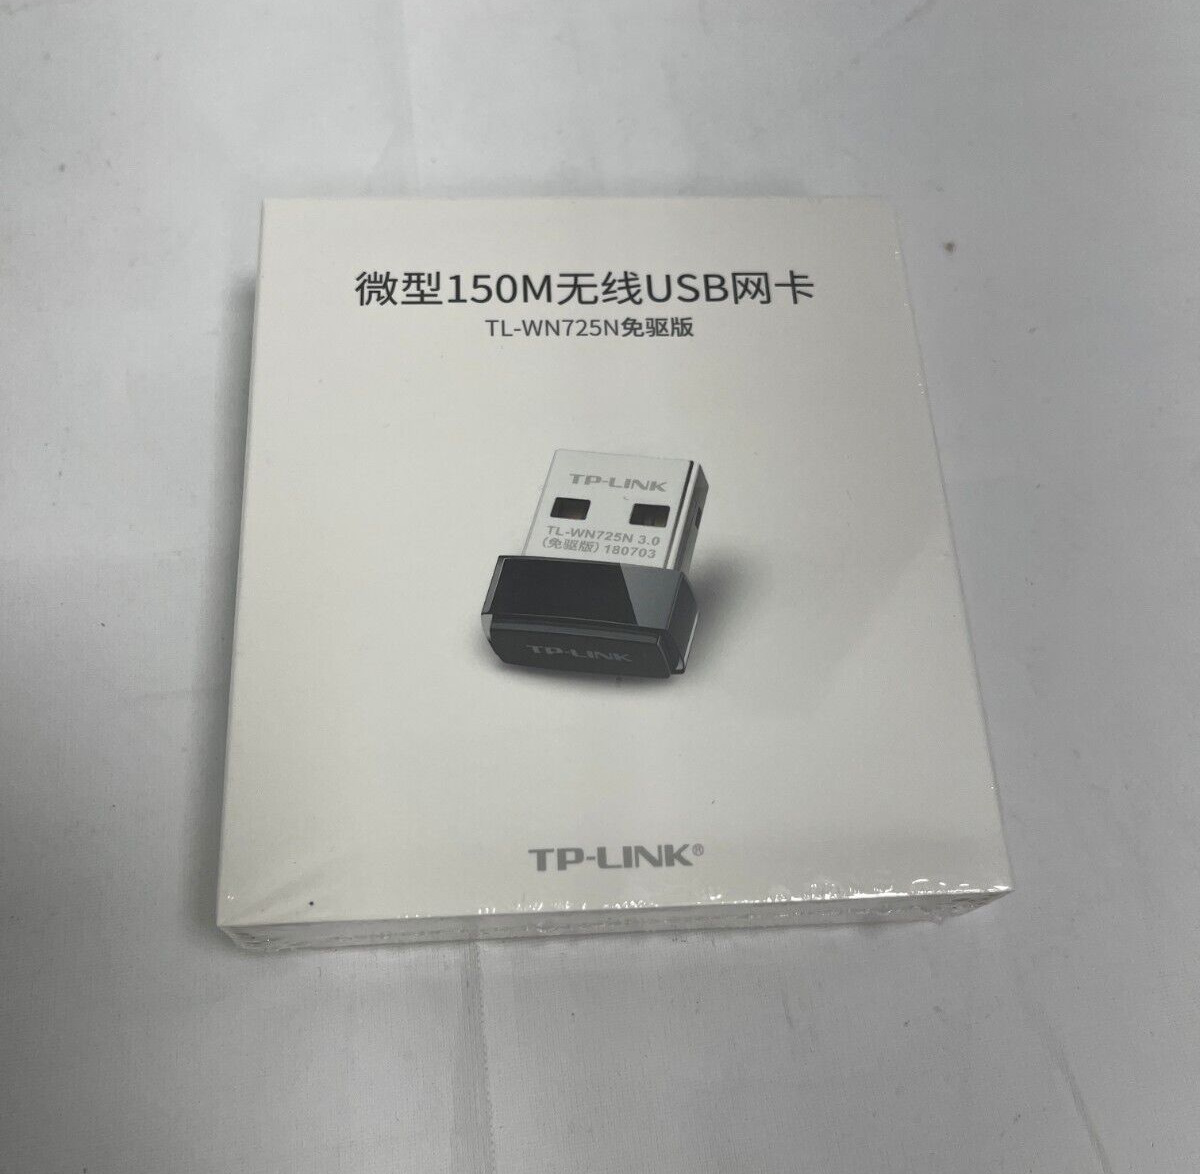 TP-Link TL-WN725N 150Mbps Wireless N USB Adapter - NEW SEALED